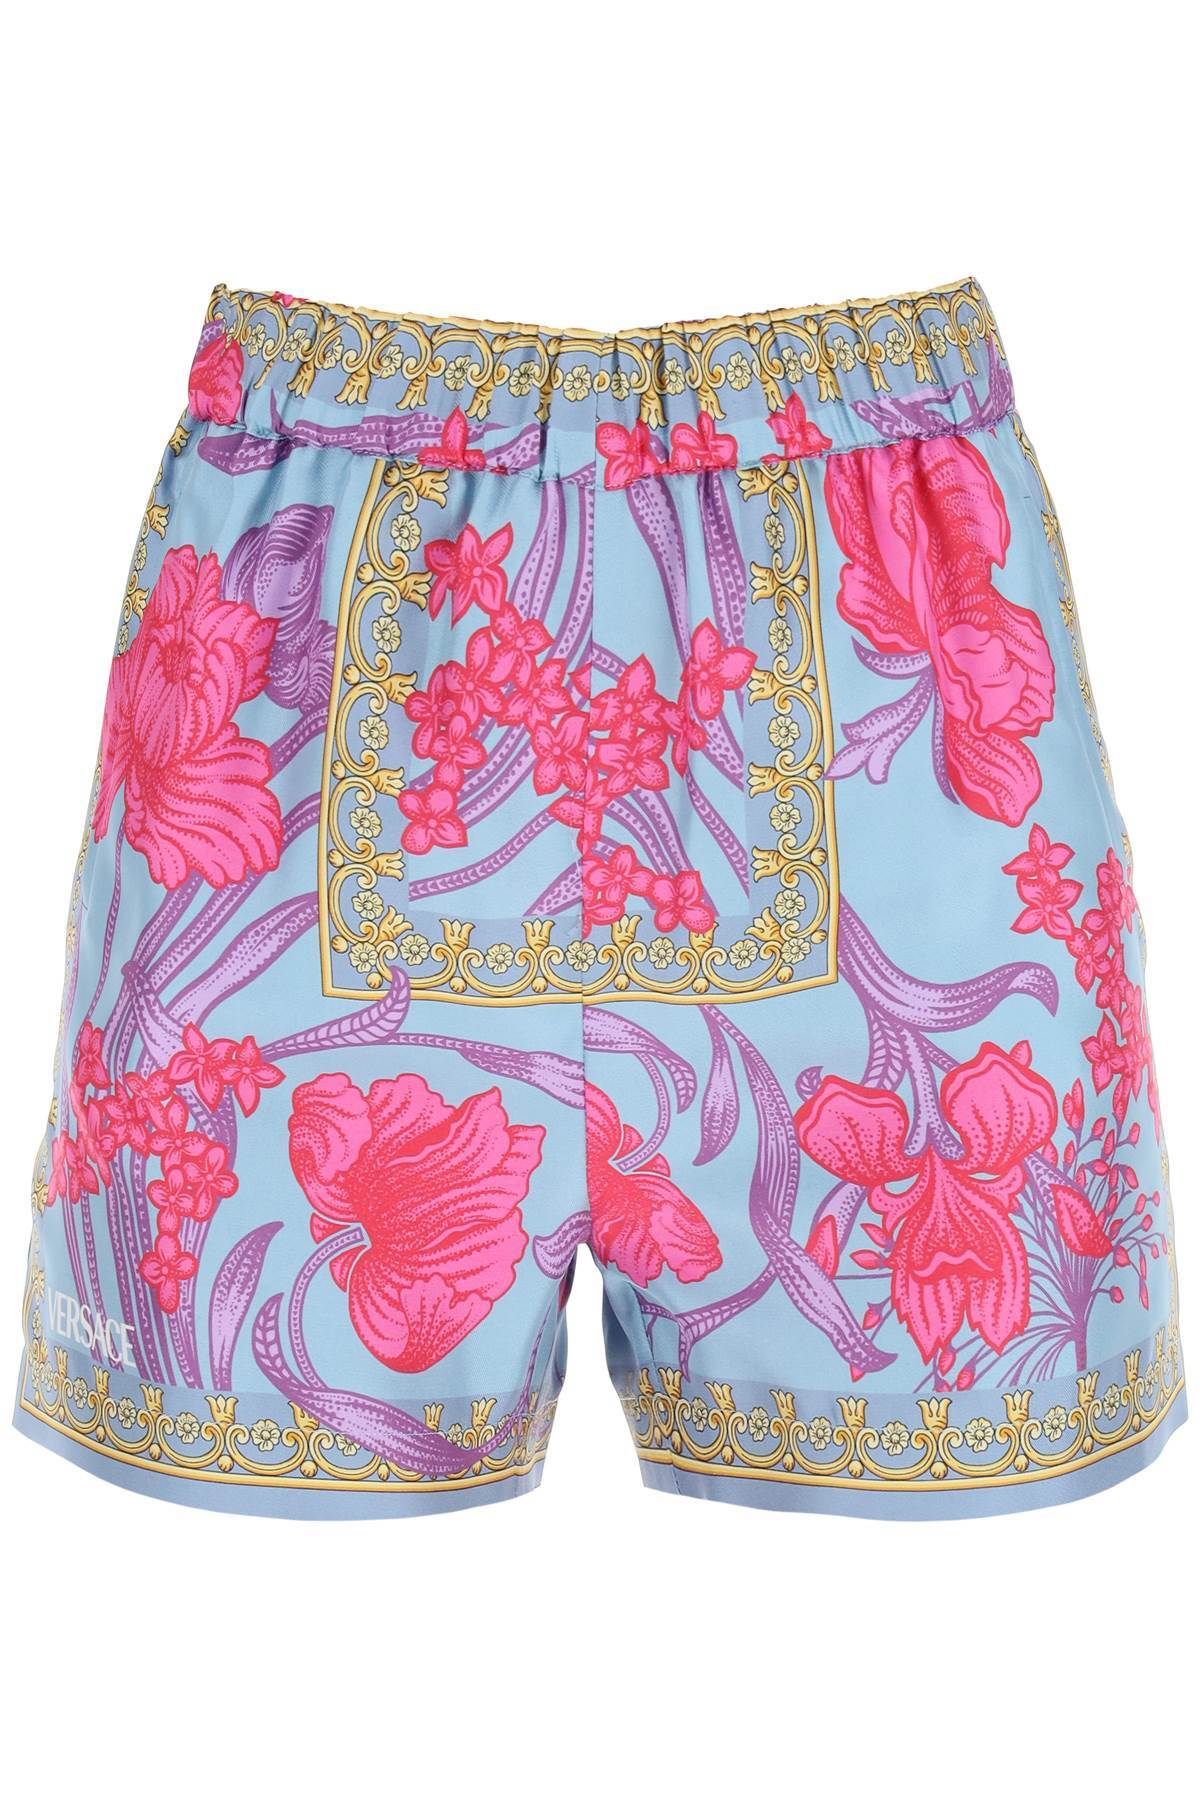 Versace Silk Shorts With Acid Bouquet Print in blue